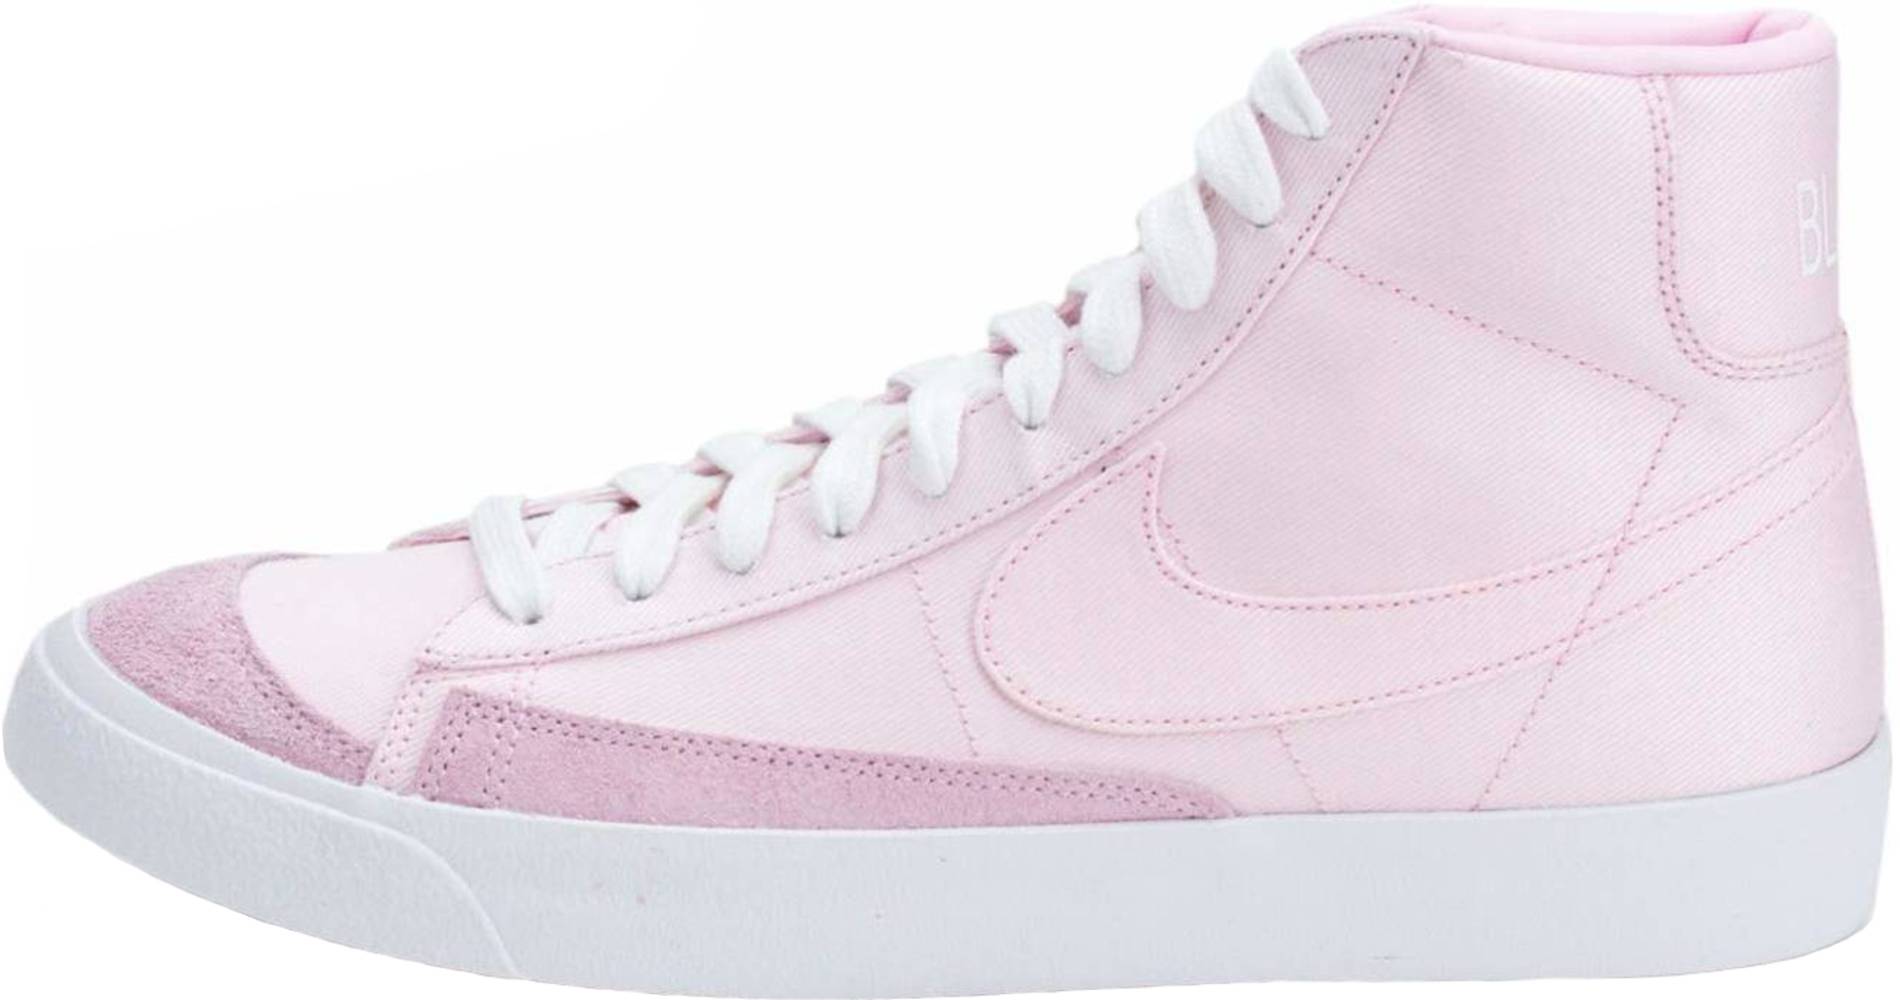 Save 36% on Pink Nike Sneakers (14 